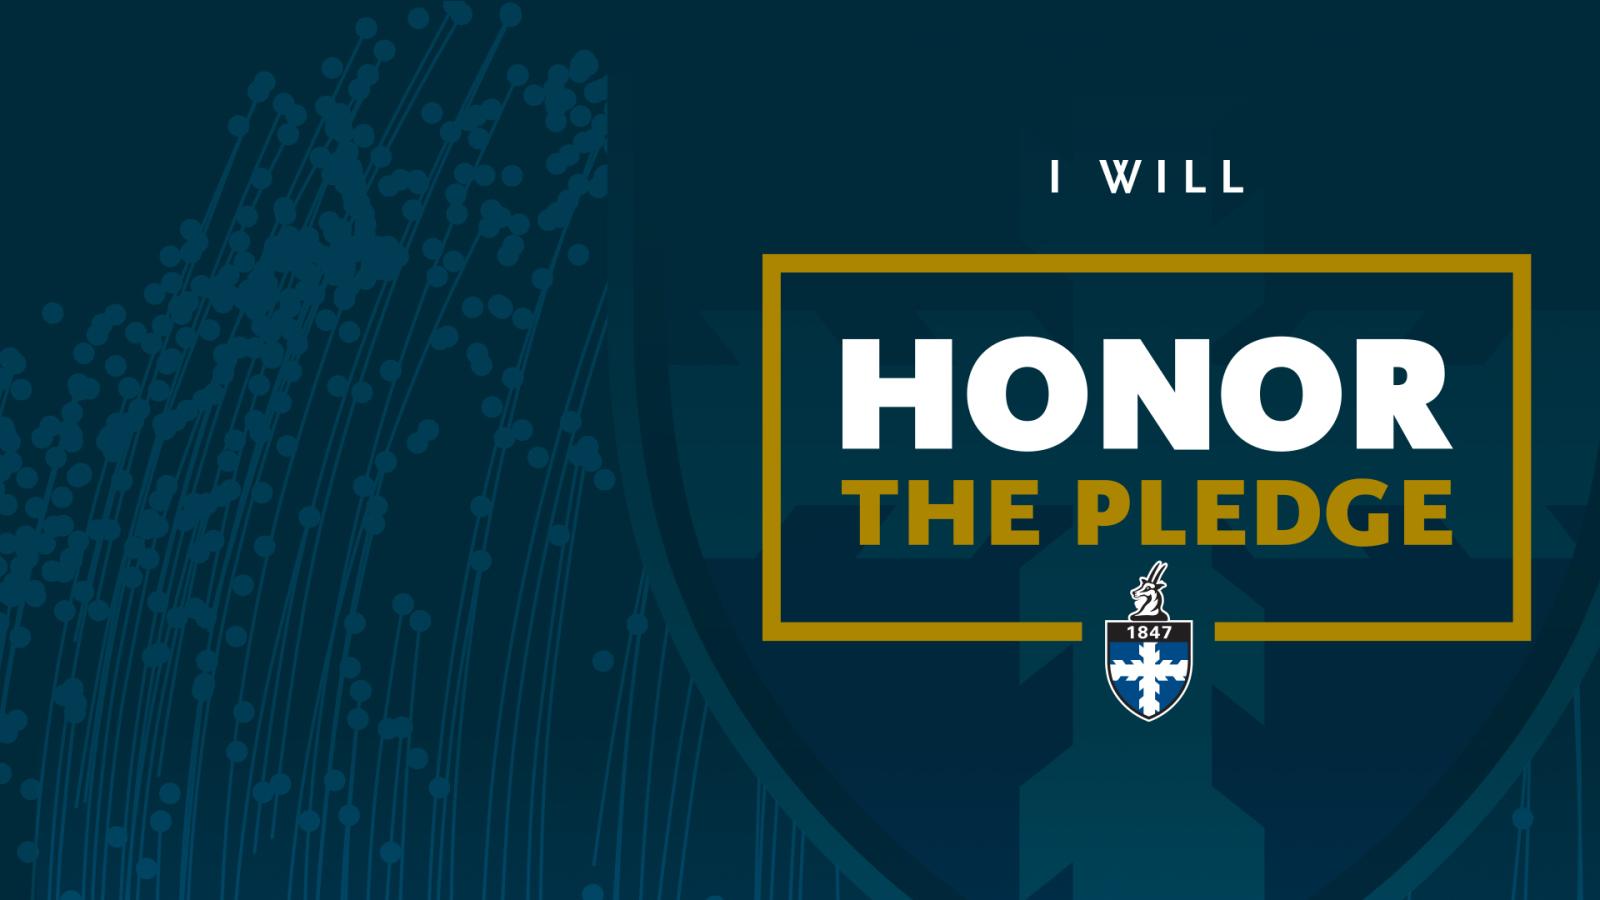 Text that says, "I will honor the pledge" on blue background.